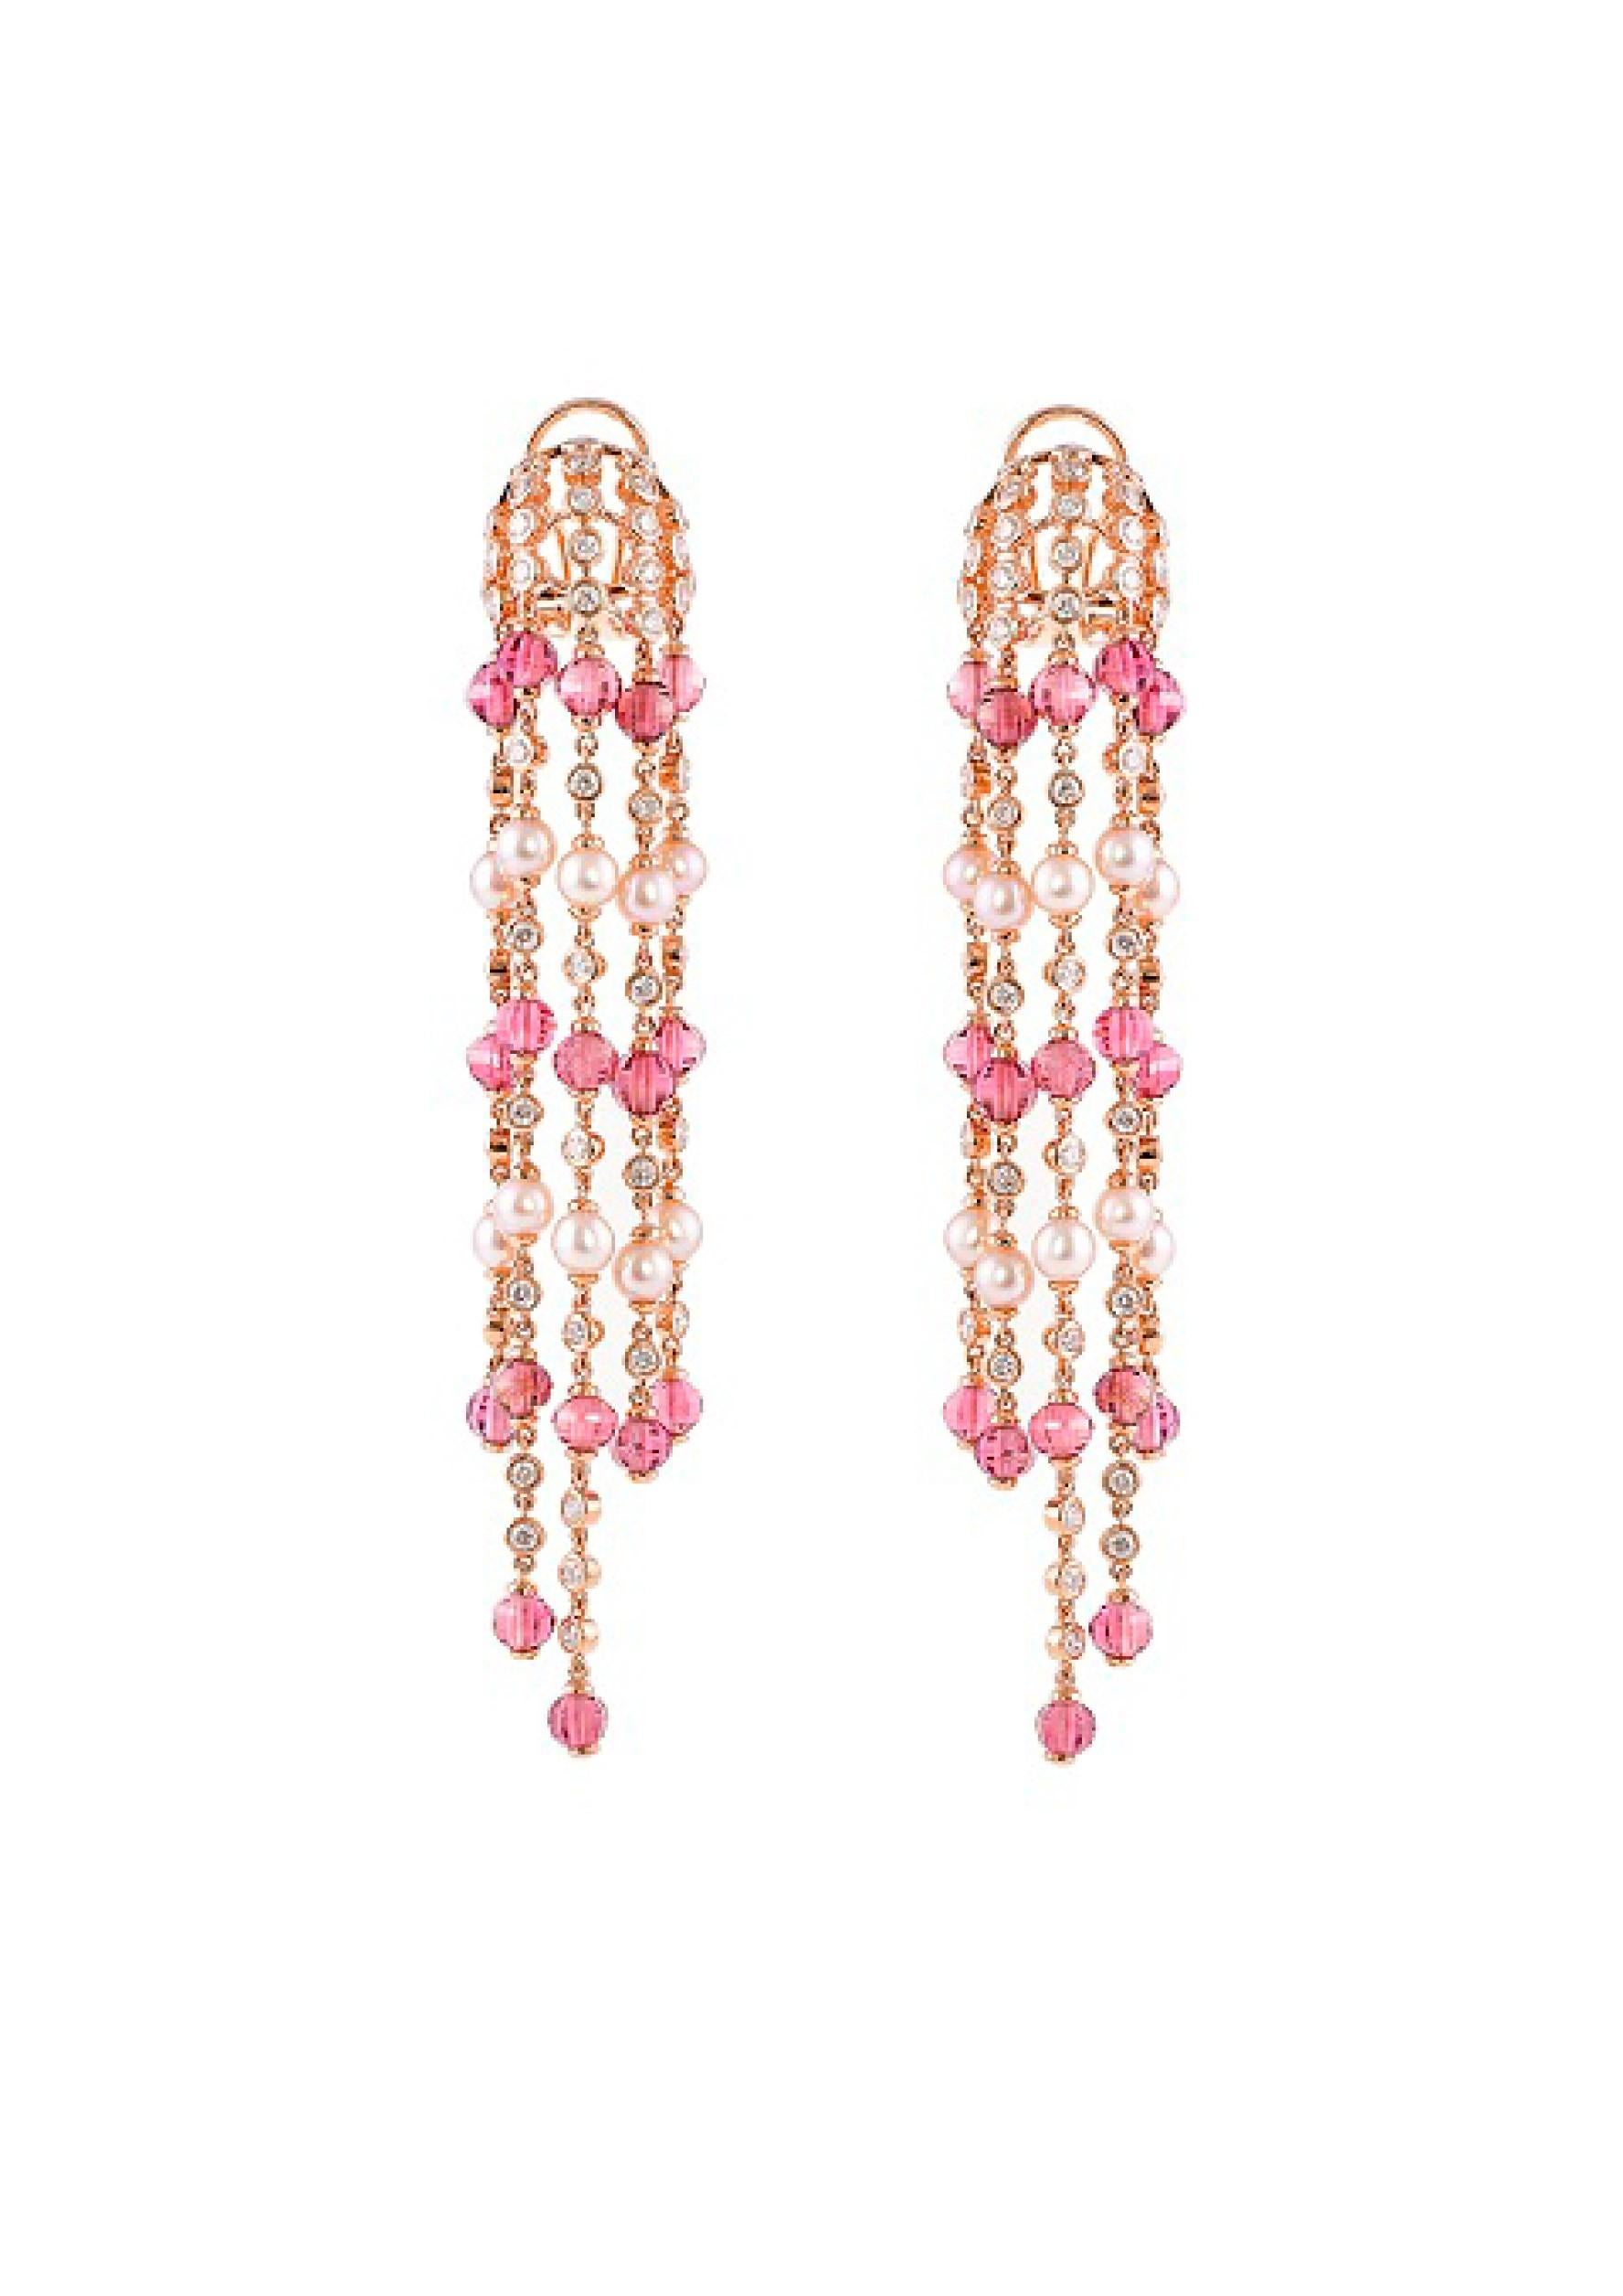 An exclusive collection of designer and unique dangle earrings by Sunita Nahata Fine Design. 

Pink Tourmaline and Pink Pearl Dangle Earring in 14 Karat Rose Gold.

Pink Tourmaline: 16.85 carat, 4.00 Size, Round Ball Shape.
Pink Pearl: 9.35 carat,